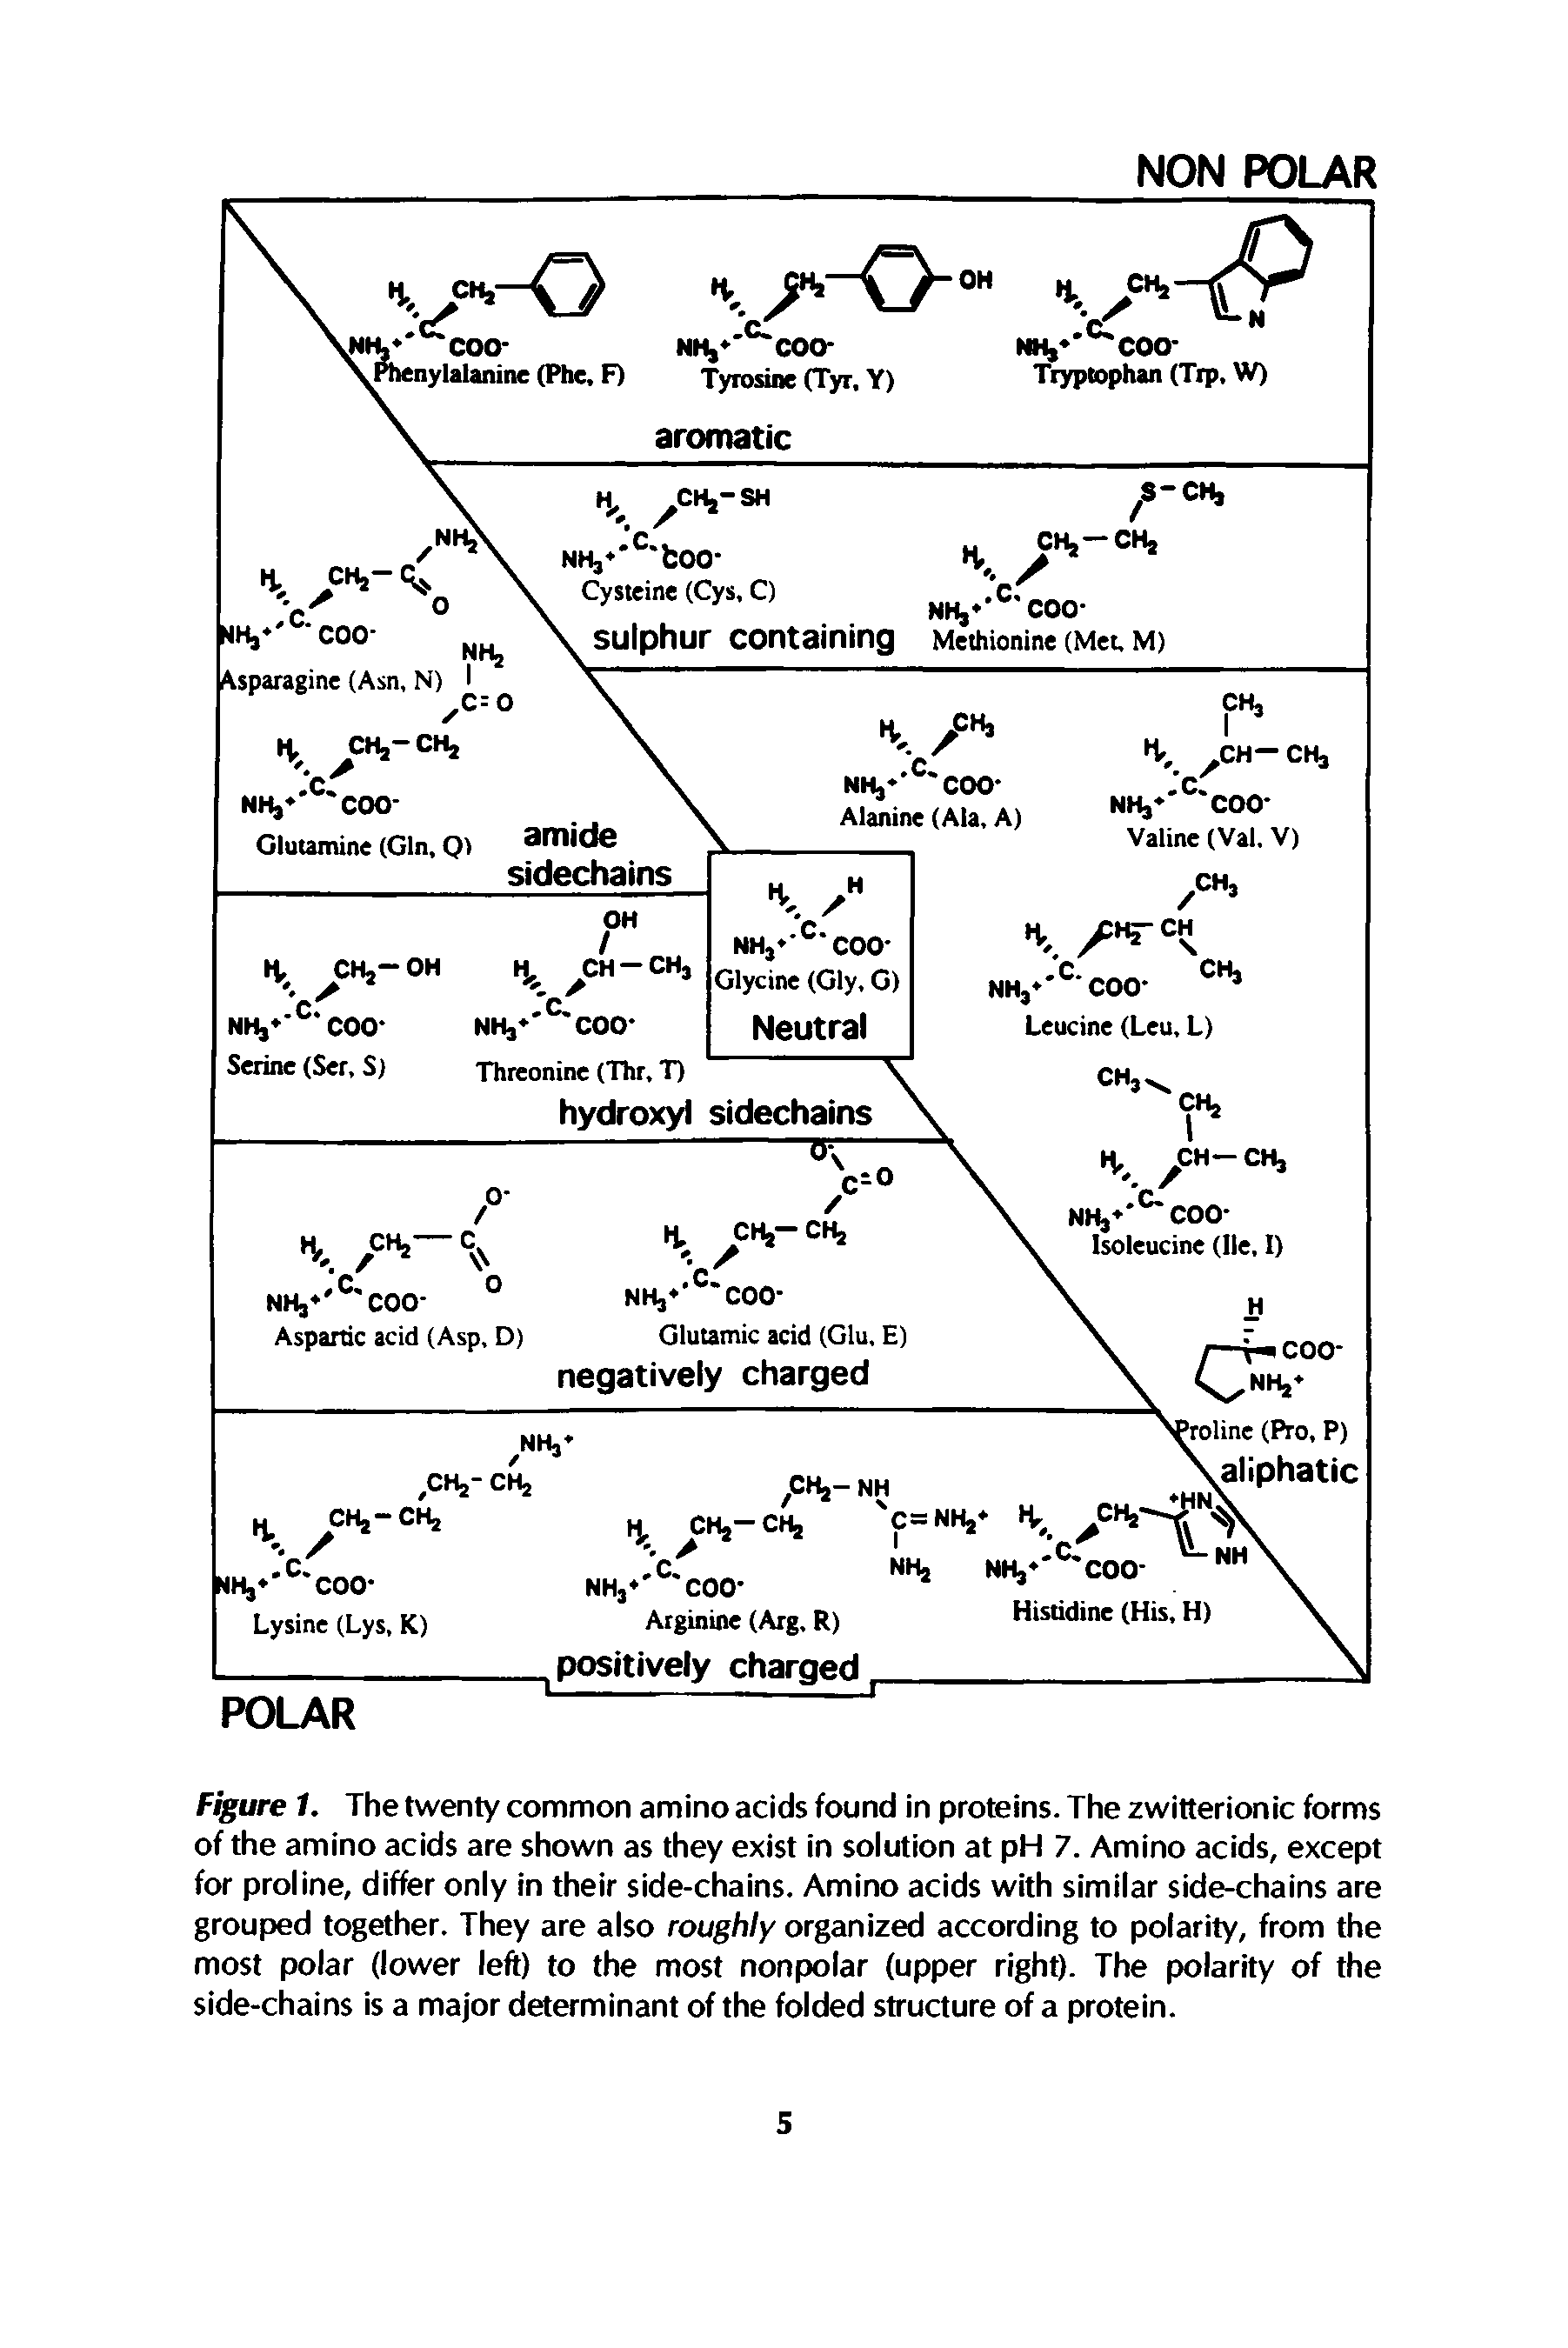 Figure 1. The twenty common amino acids found in proteins. The zwitterionic forms of the amino acids are shown as they exist in solution at pH 7. Amino acids, except for proline, differ only in their side-chains. Amino acids with similar side-chains are grouped together. They are also roughly organized according to polarity, from the most polar (lower left) to the most nonpolar (upper right). The polarity of the side-chains is a major determinant of the folded structure of a protein.